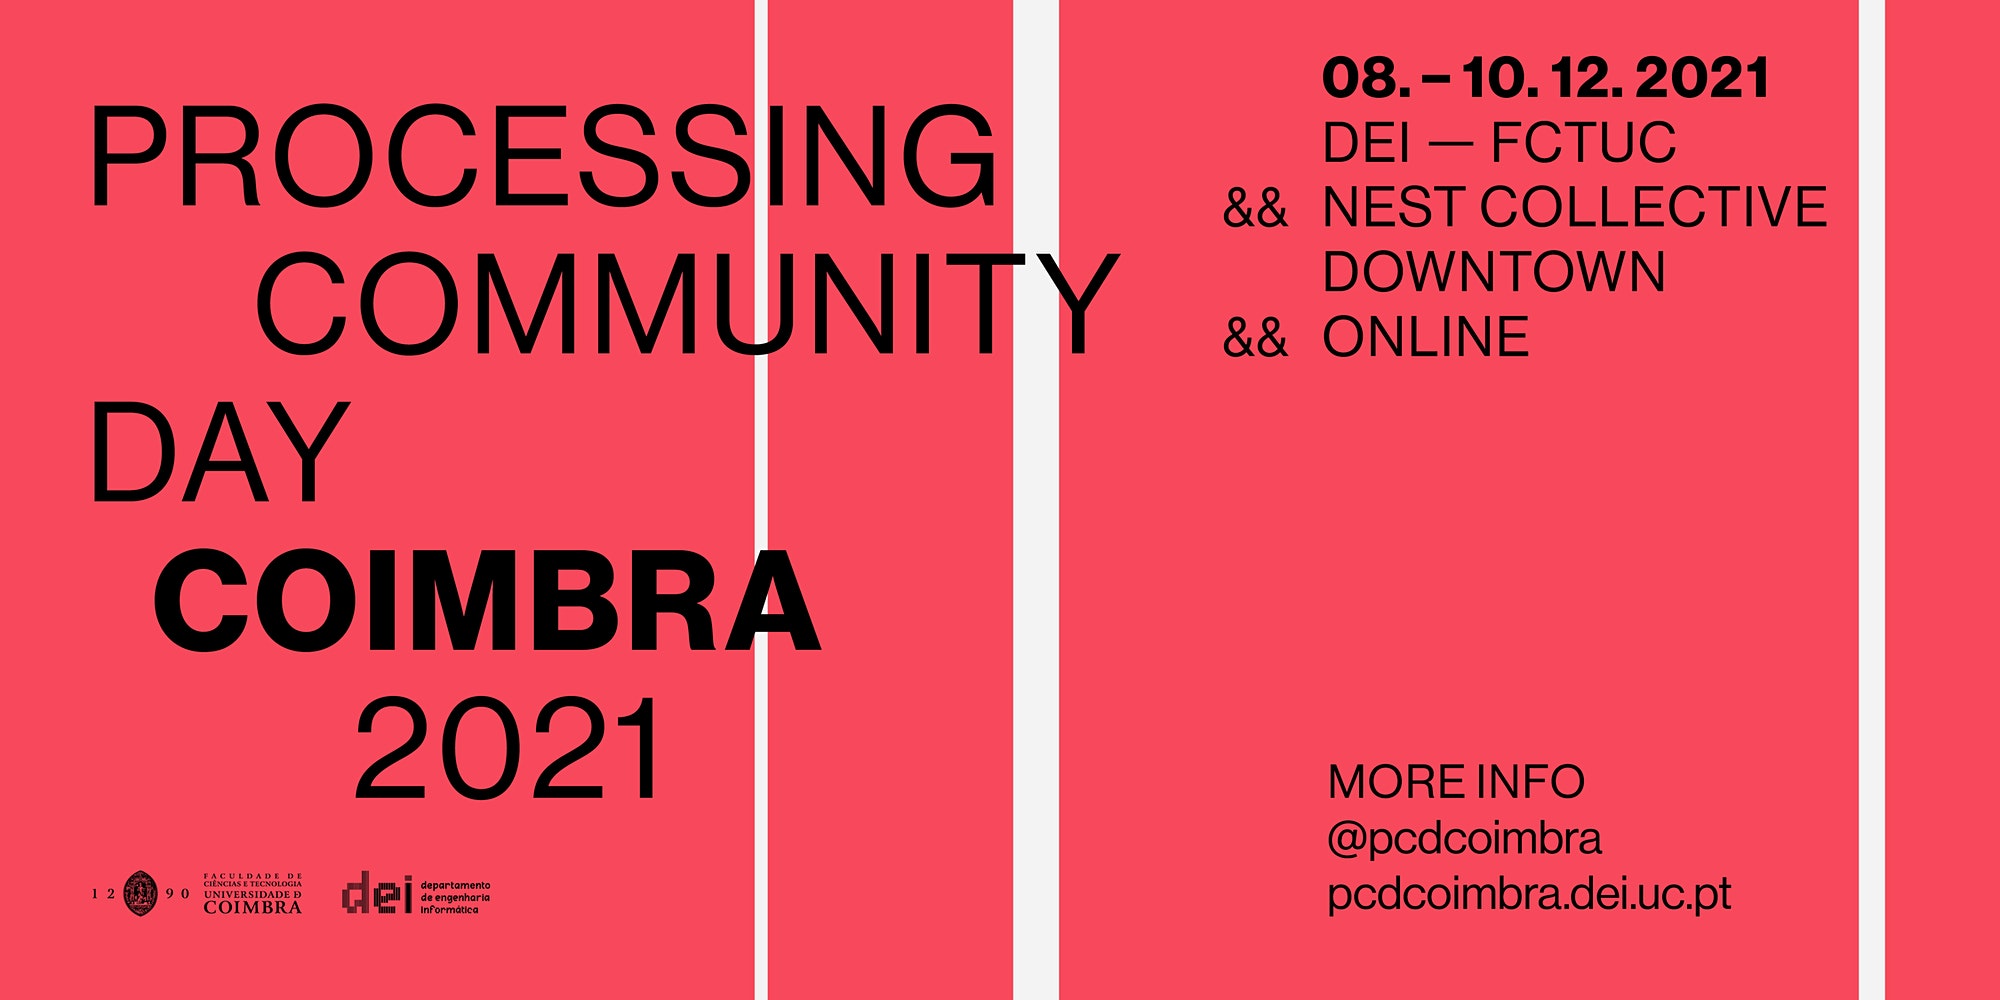 Processing Community Day@Coimbra 2021